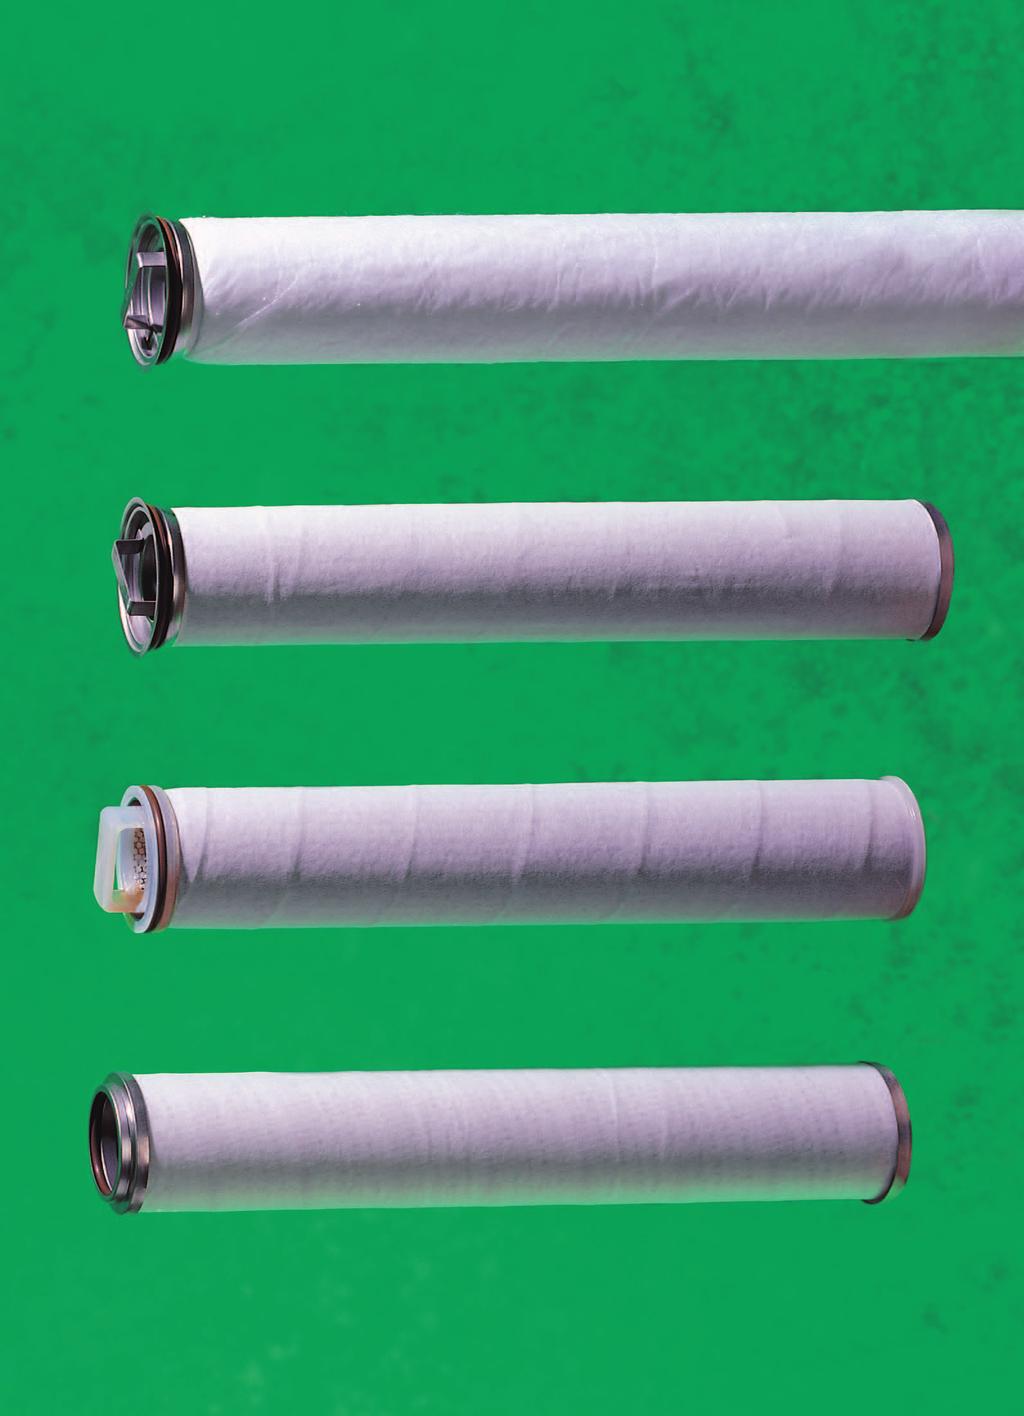 Description Part Number Dimensions Special Features Applications AquaSep Plus LCS2B1AH 20 / 508 mm length Polymeric medium does Separation of water from Coalescer LCS4B1AH 40 / 1016 mm length not